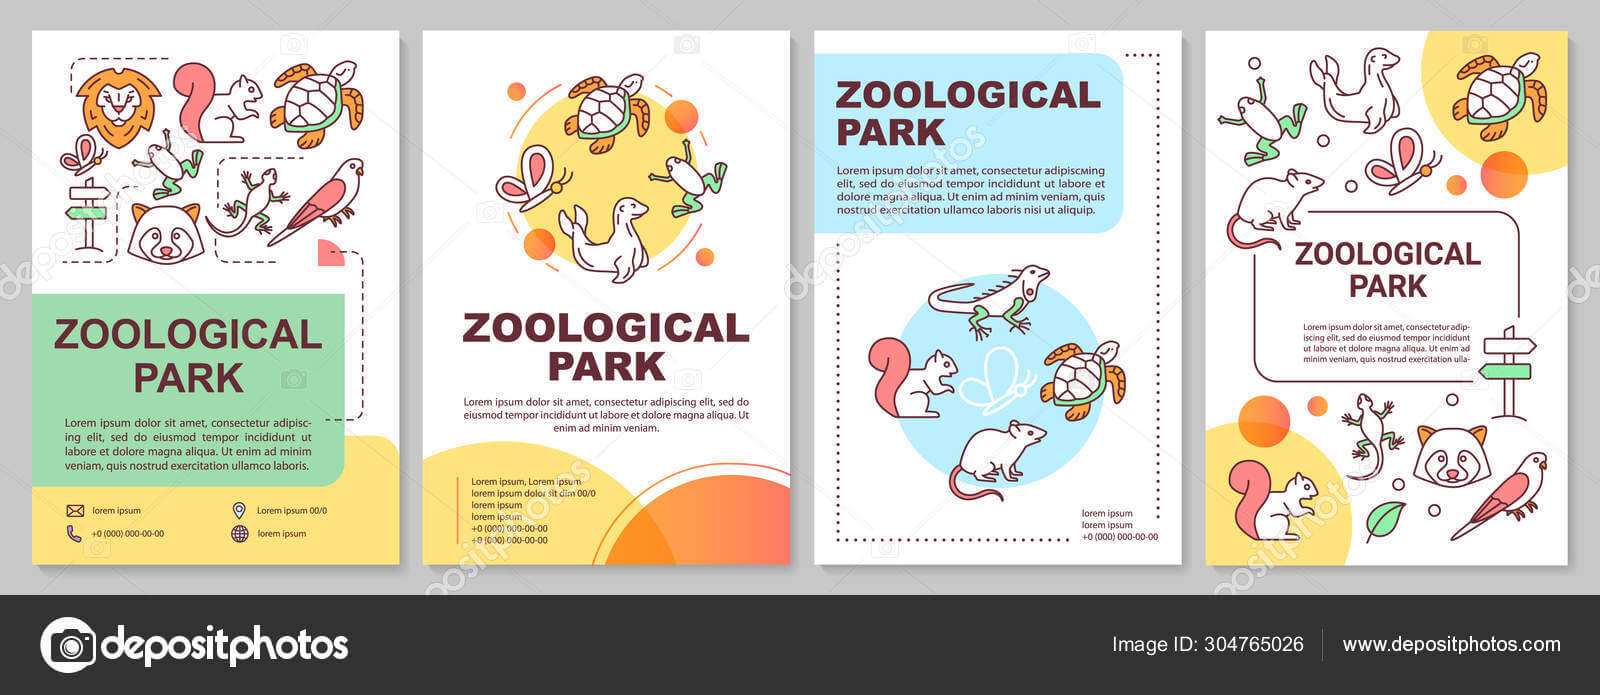 Zoological Park Brochure Template Layout. Zoo Animals. Flyer Within Zoo Brochure Template